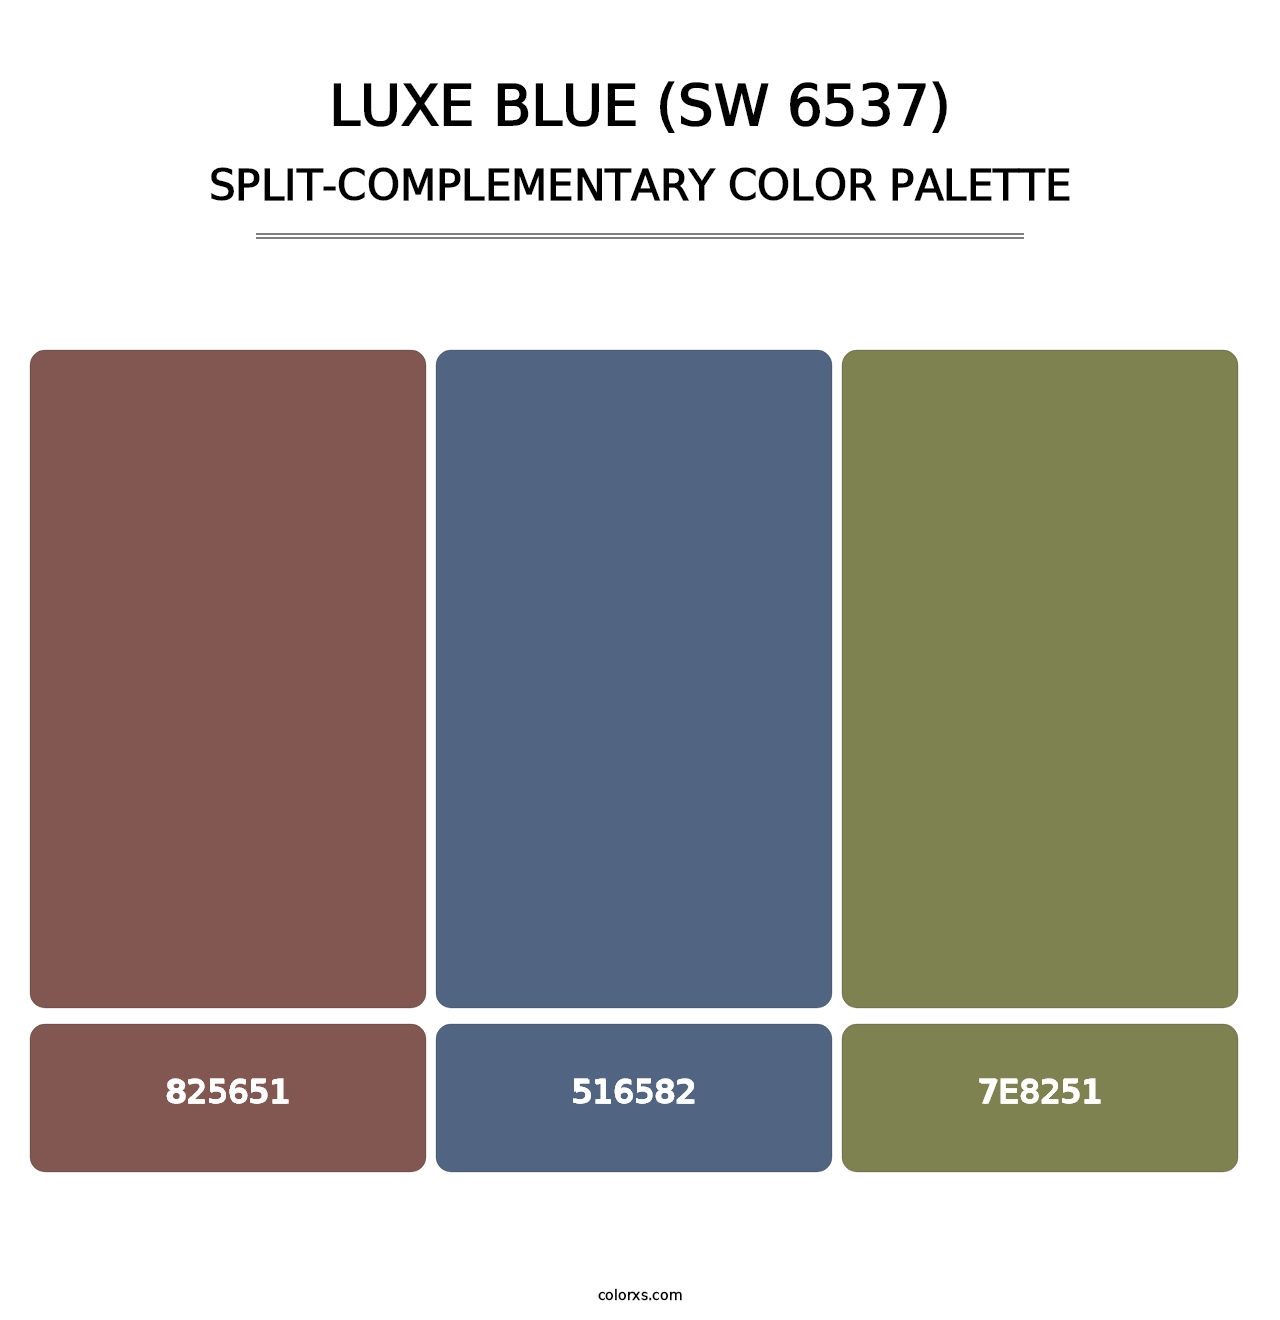 Luxe Blue (SW 6537) - Split-Complementary Color Palette